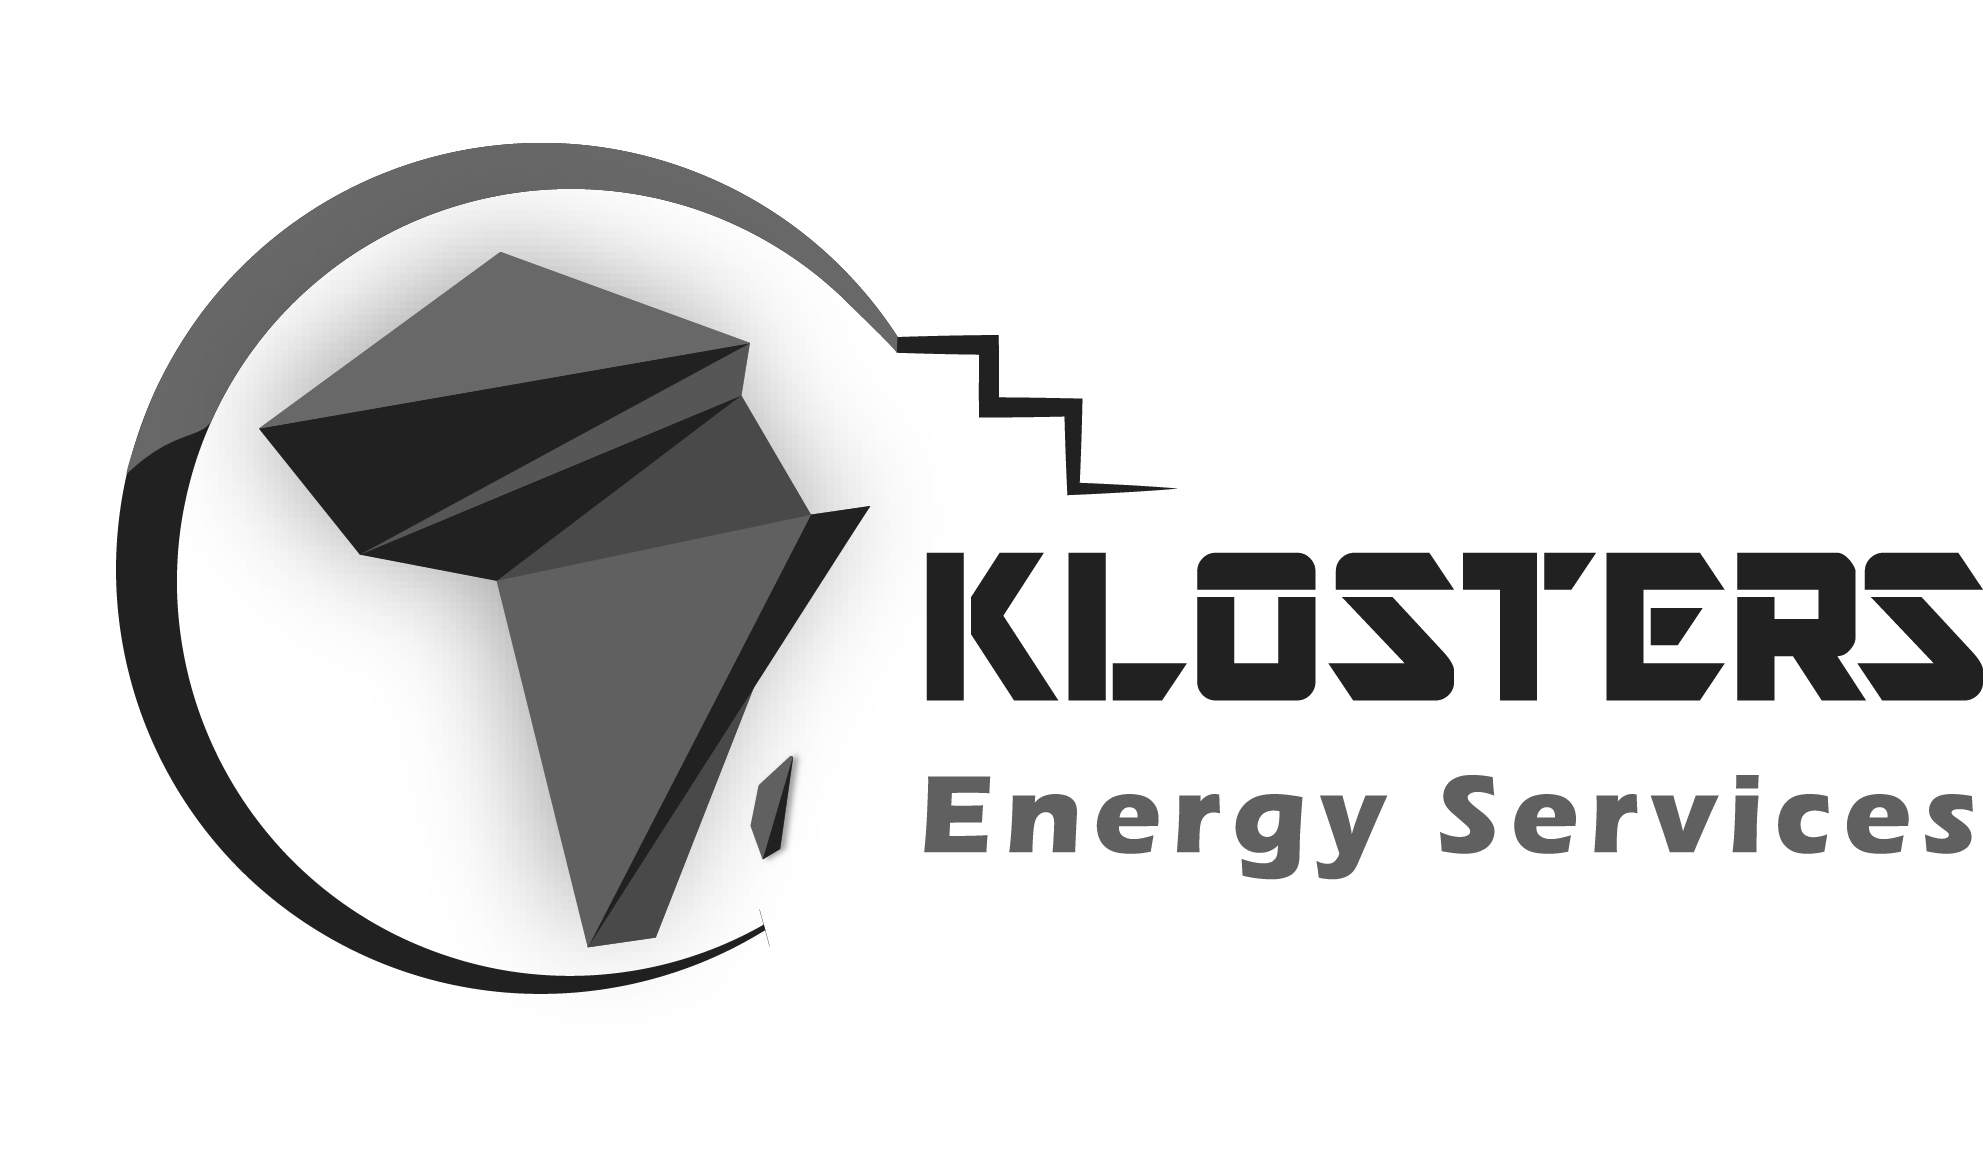 Klosters Energy Services Logo ( Monochrome )